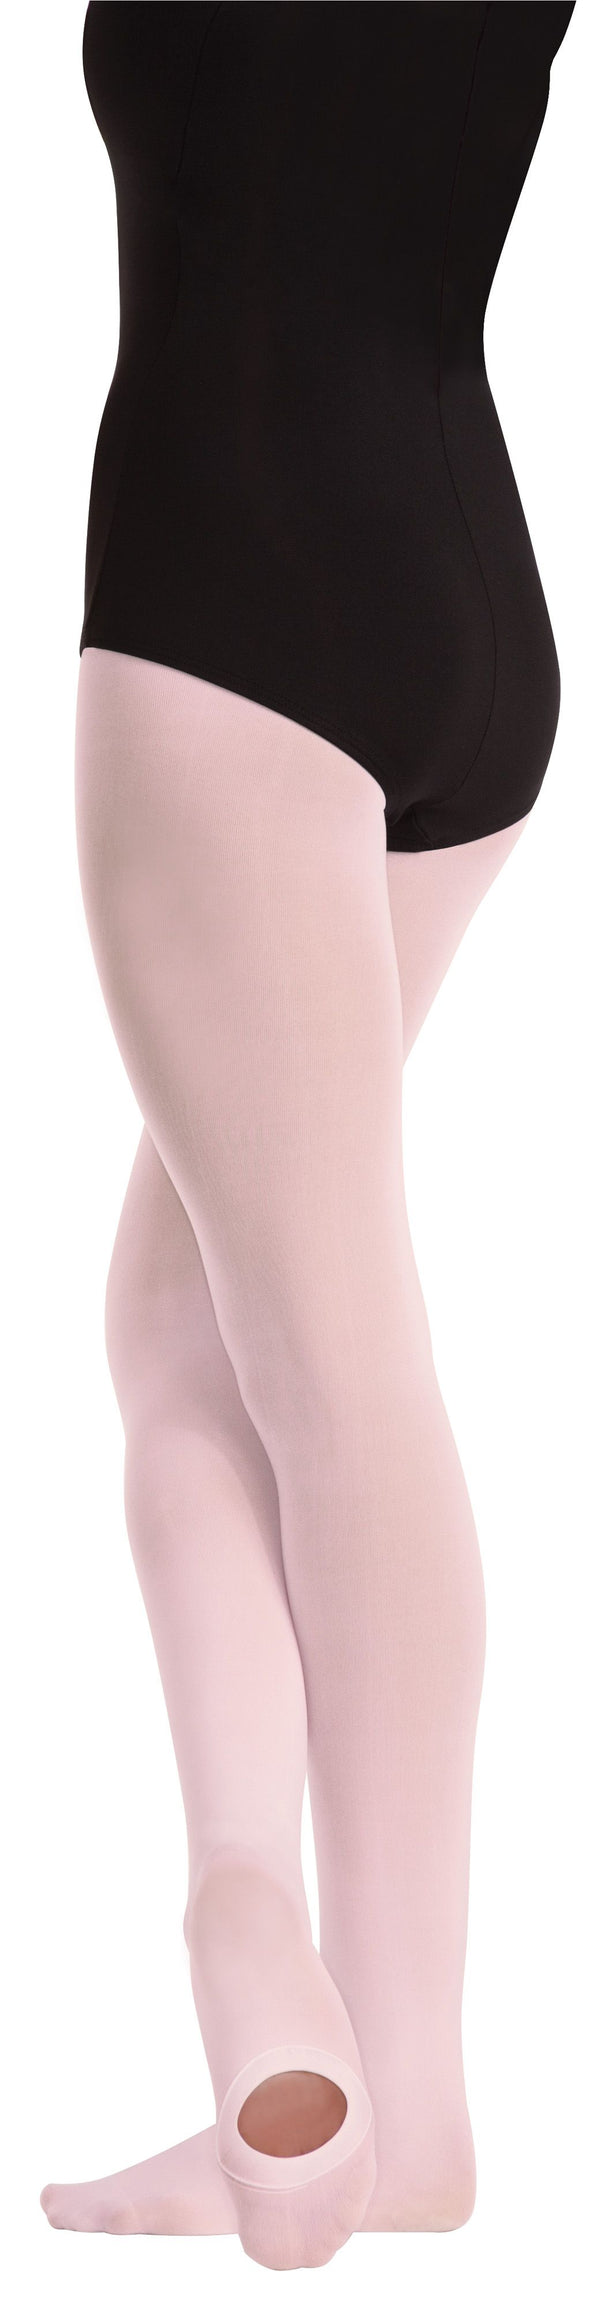 Convertible Tights by Body Wrappers (Child)